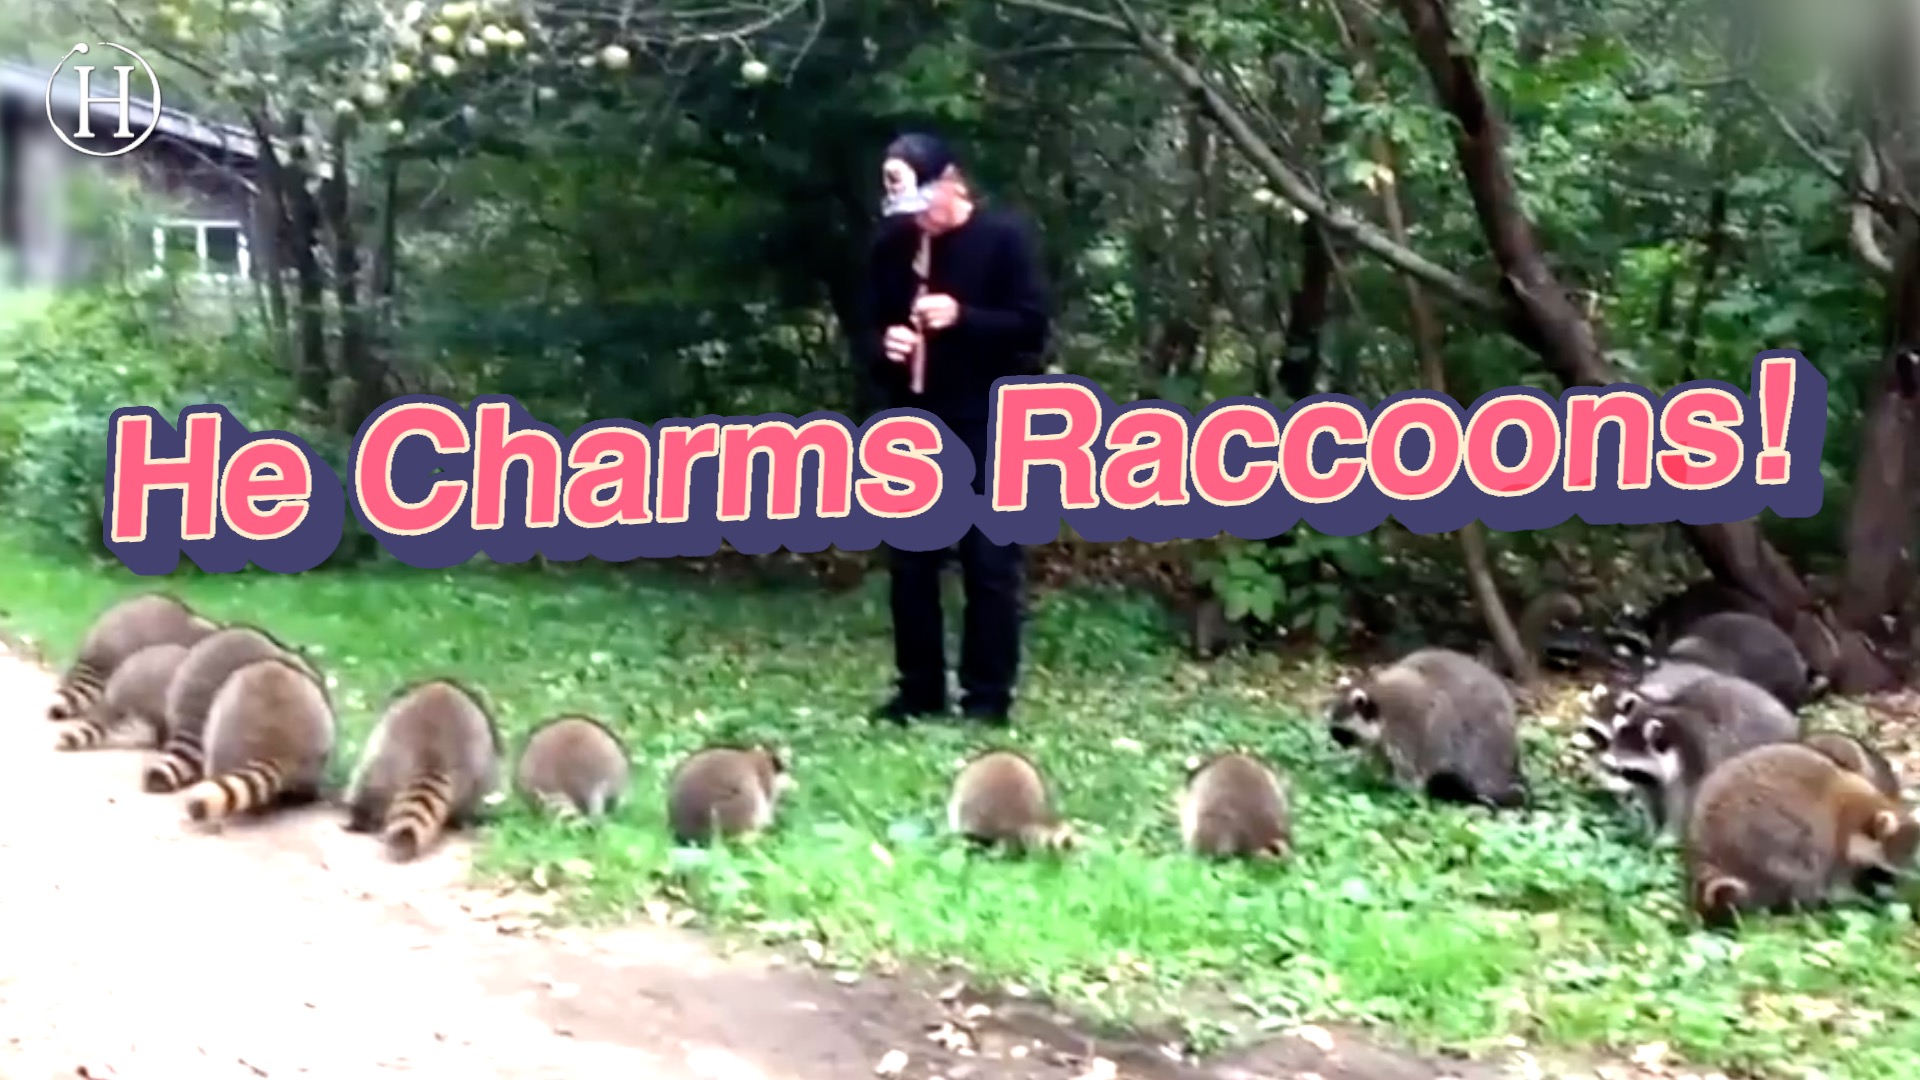 This Man Is the Pied Piper of Raccoons | Humanity Life